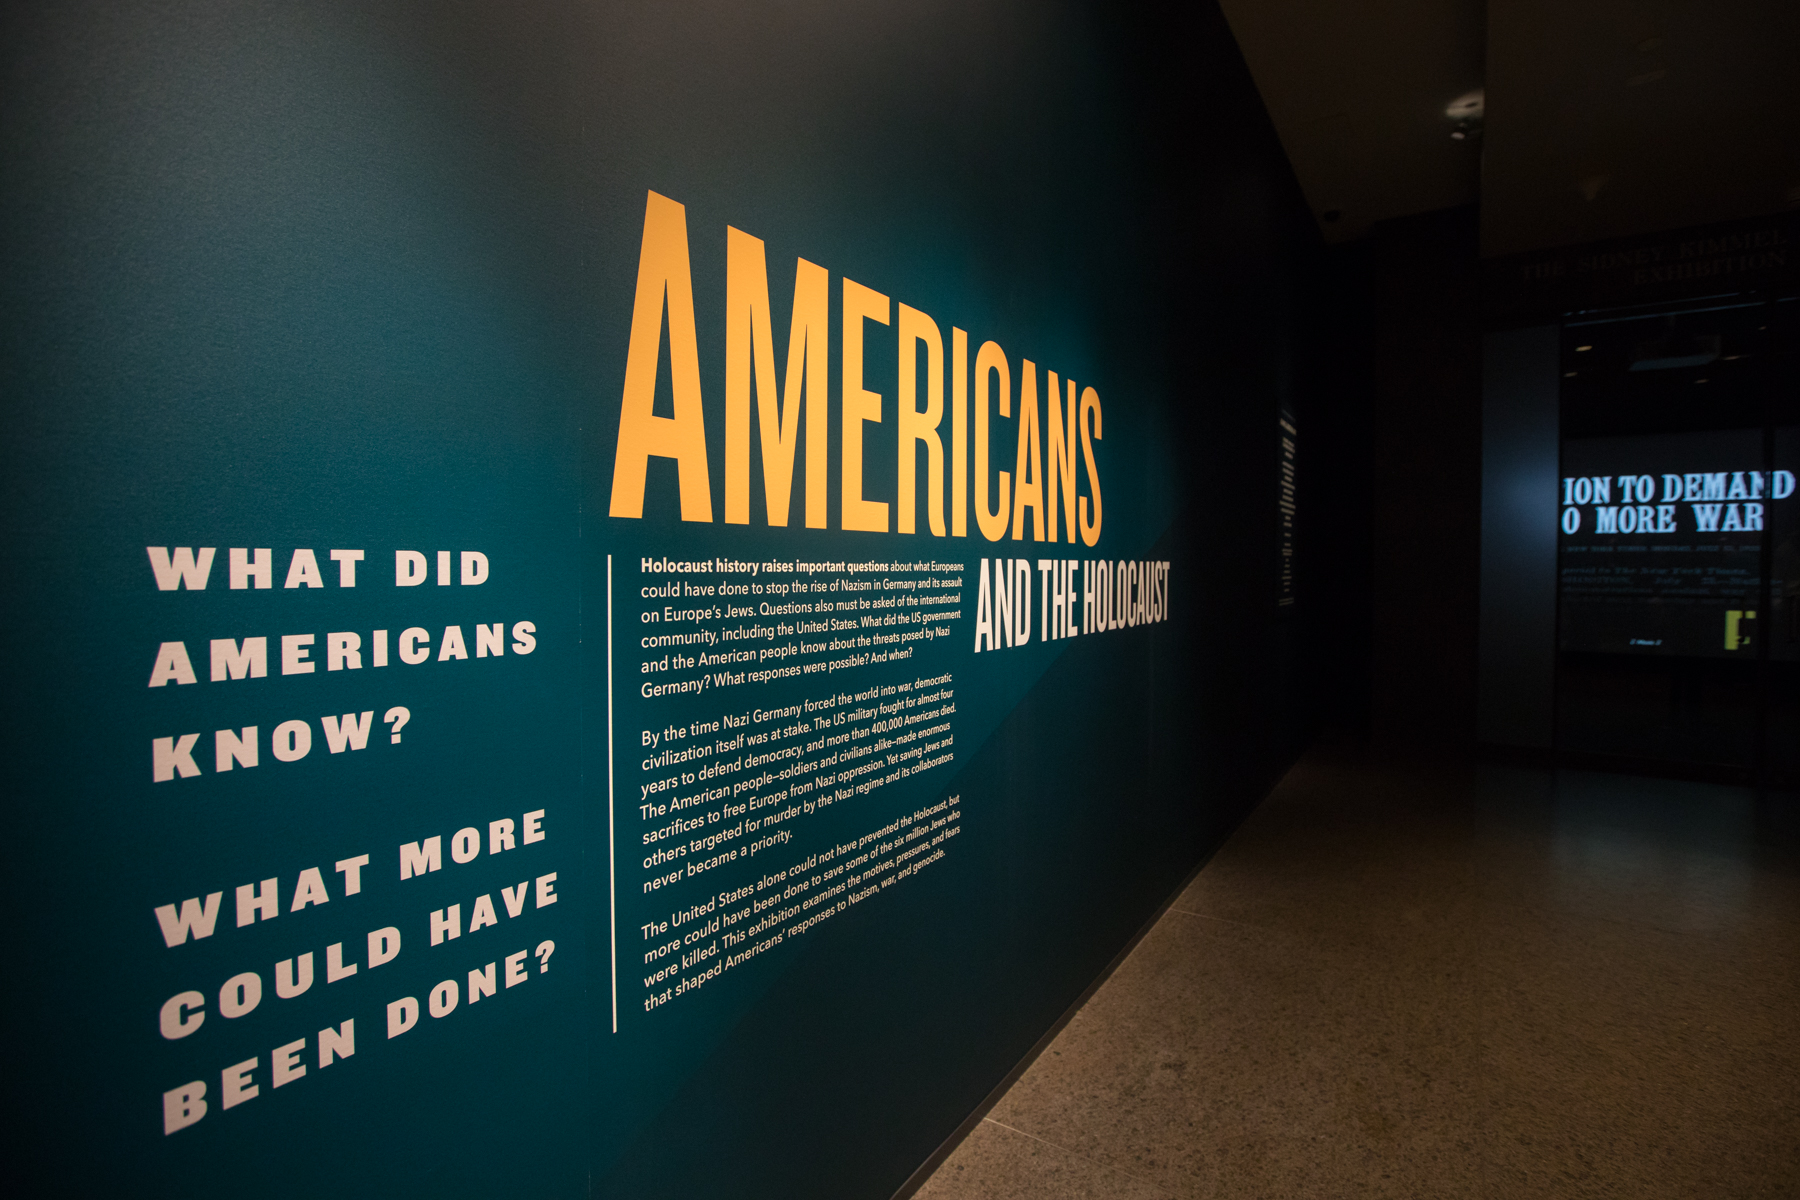 Call for Entries: Americans and the Holocaust